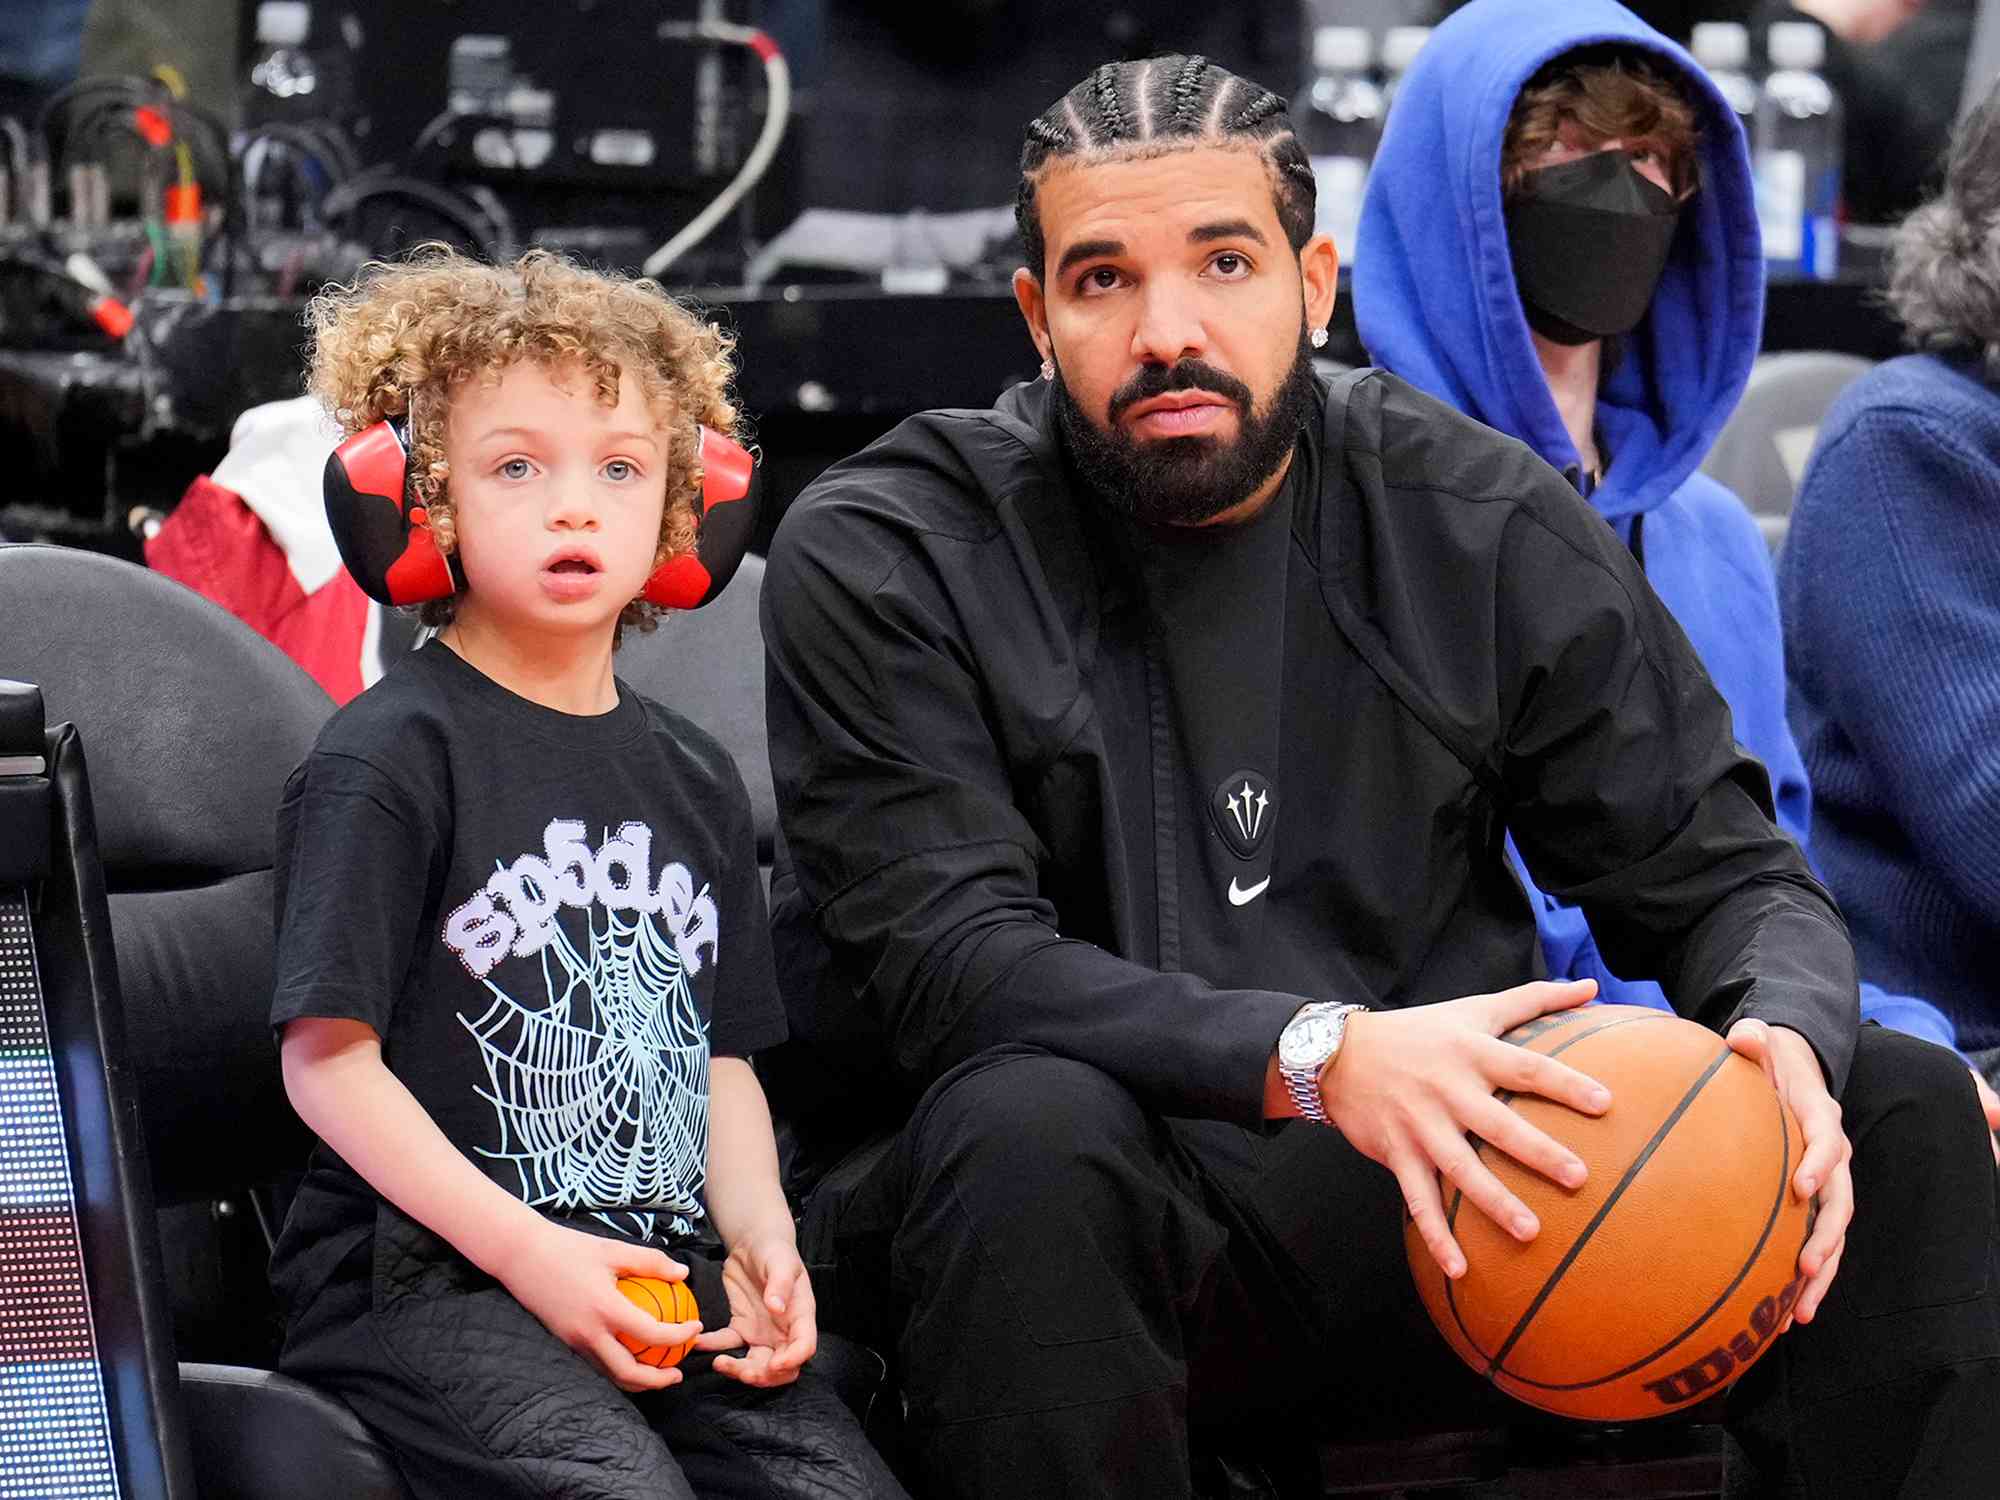 Who is Adonis Graham? Drake's son bio: age, mother, height, net worth, full name, parents, Wikipedia